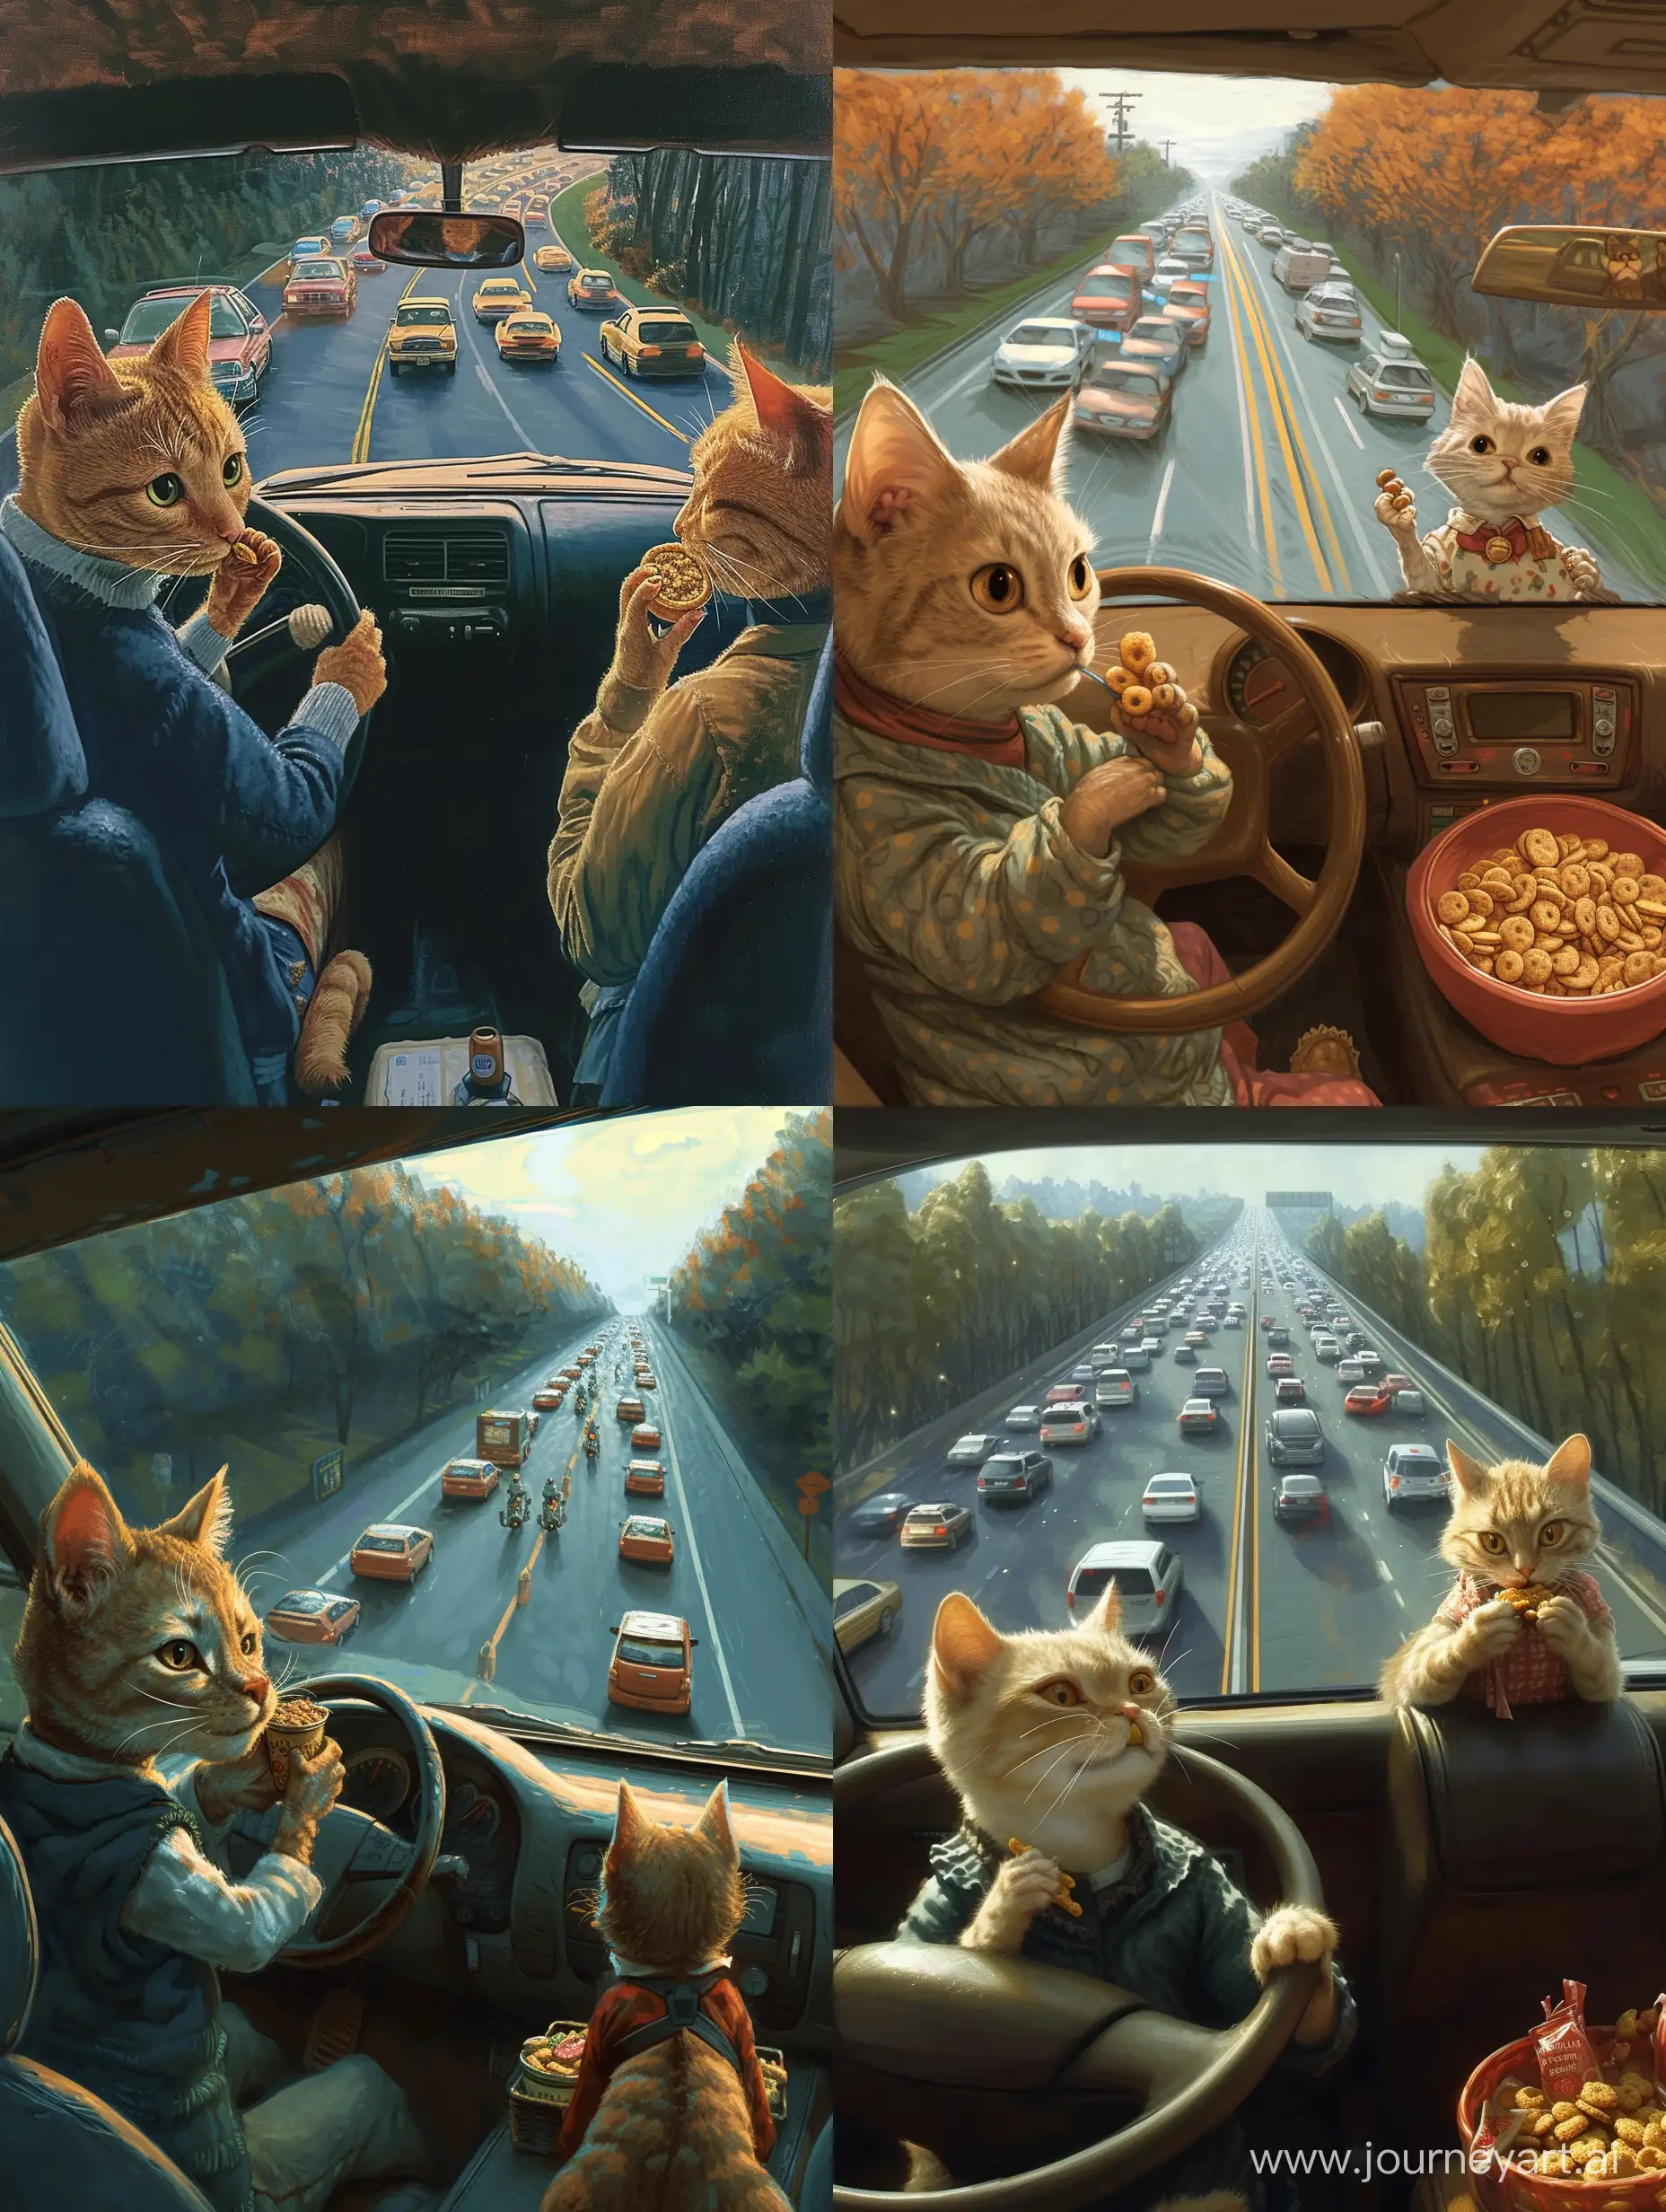 Cats-in-Stylish-Drive-Feline-Friends-Cruise-in-Fashion-with-Snacks